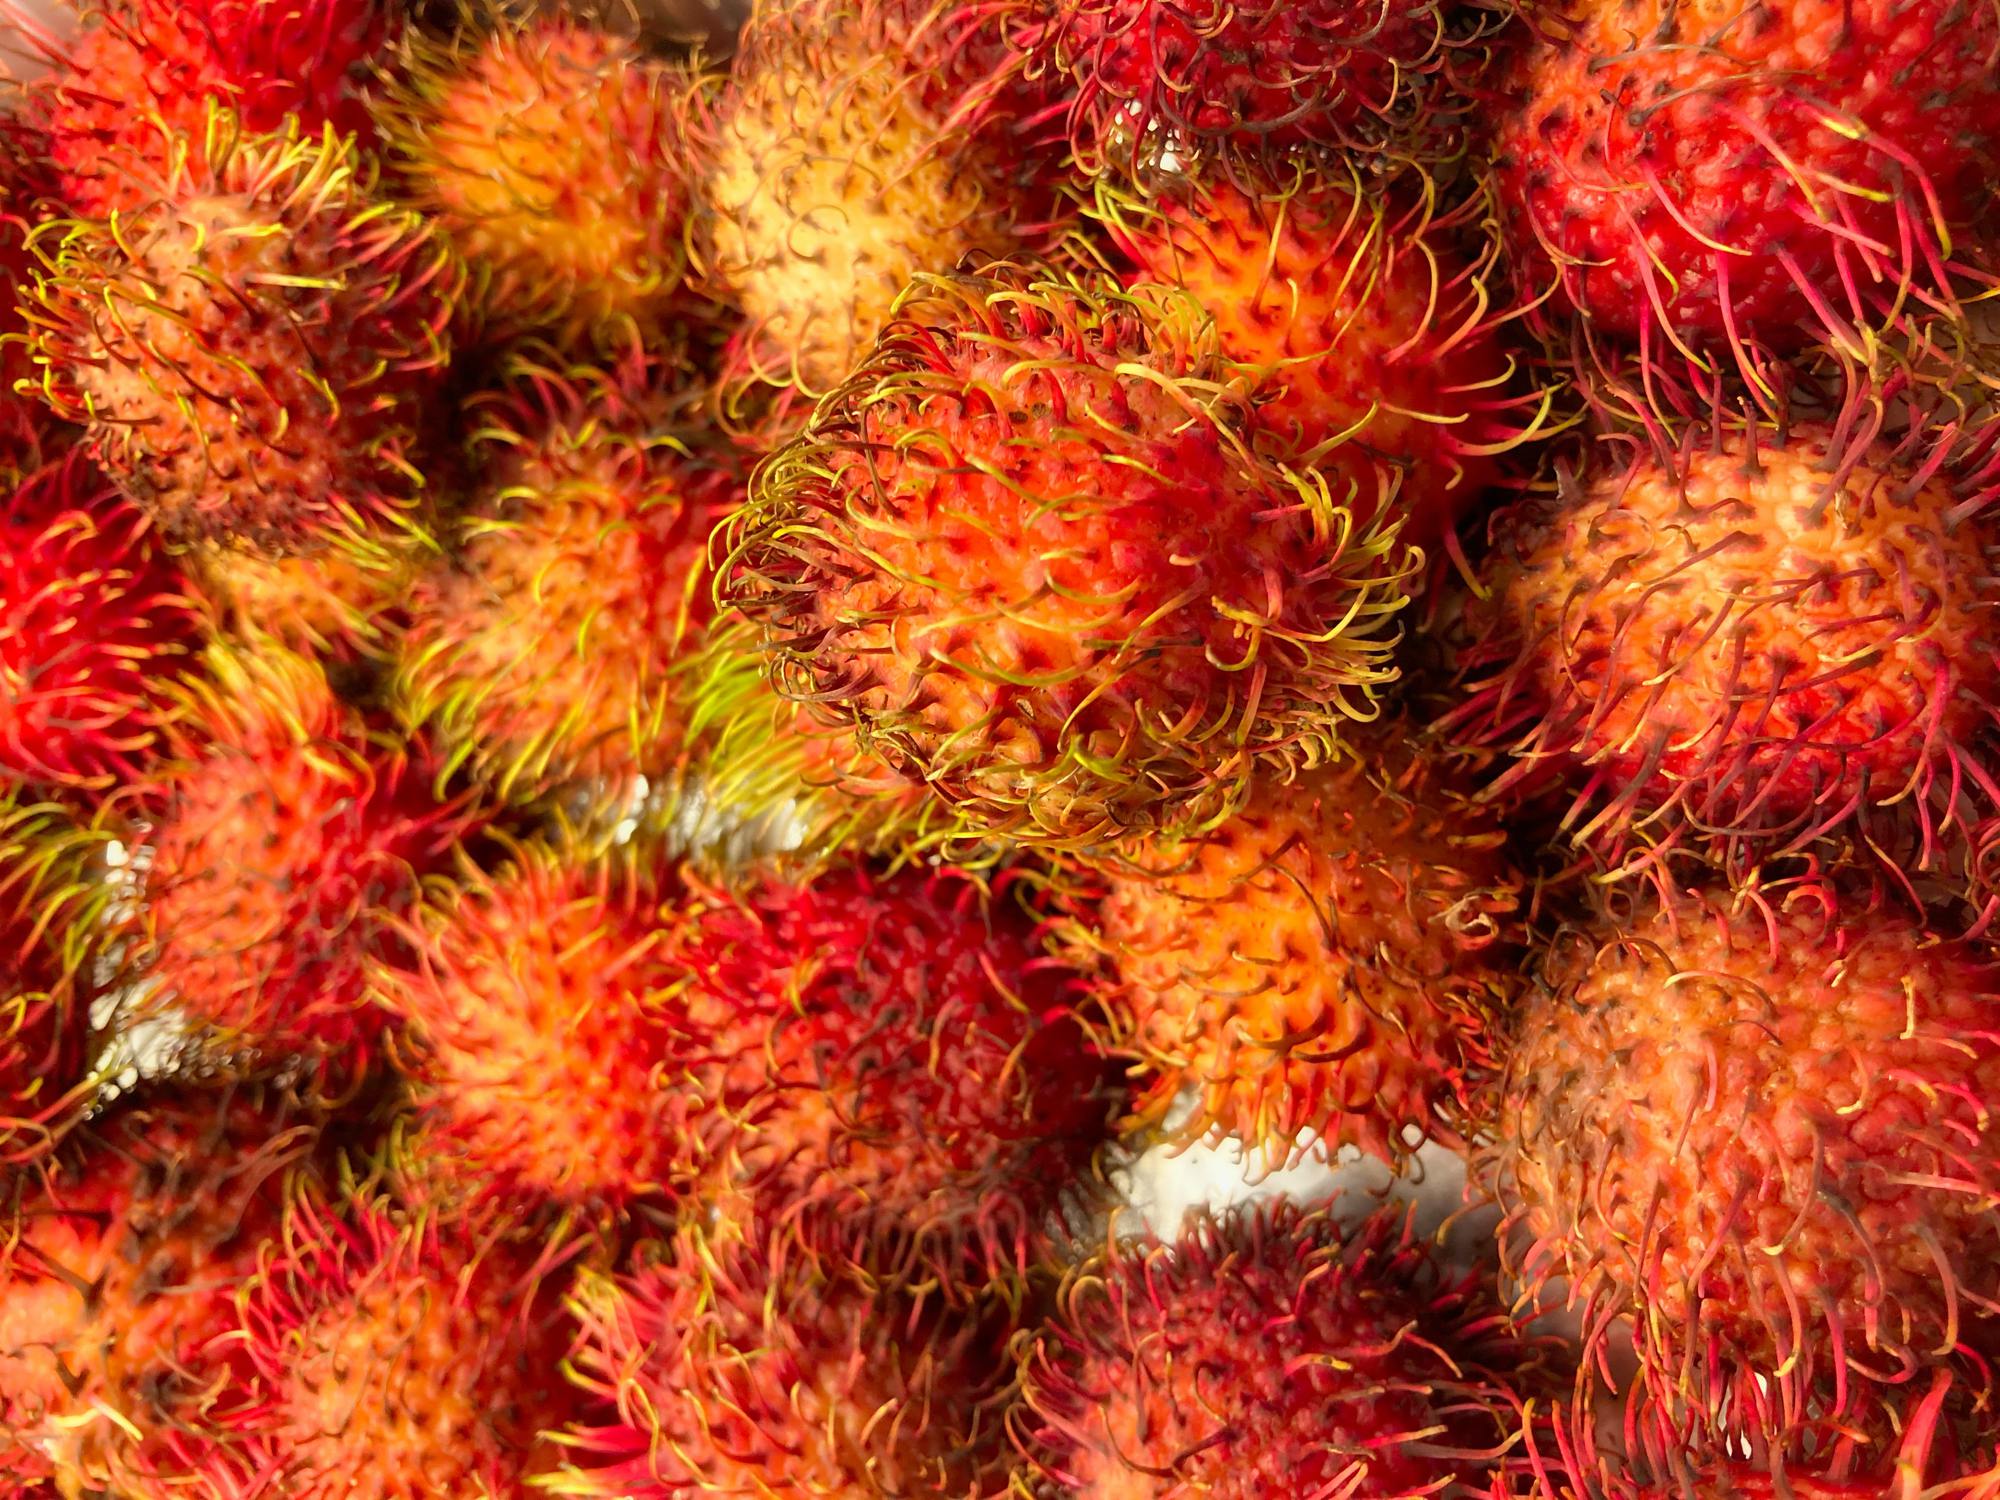 Rambutan: The ability to improve sperm quality, help lose weight and prevent heart disease of 